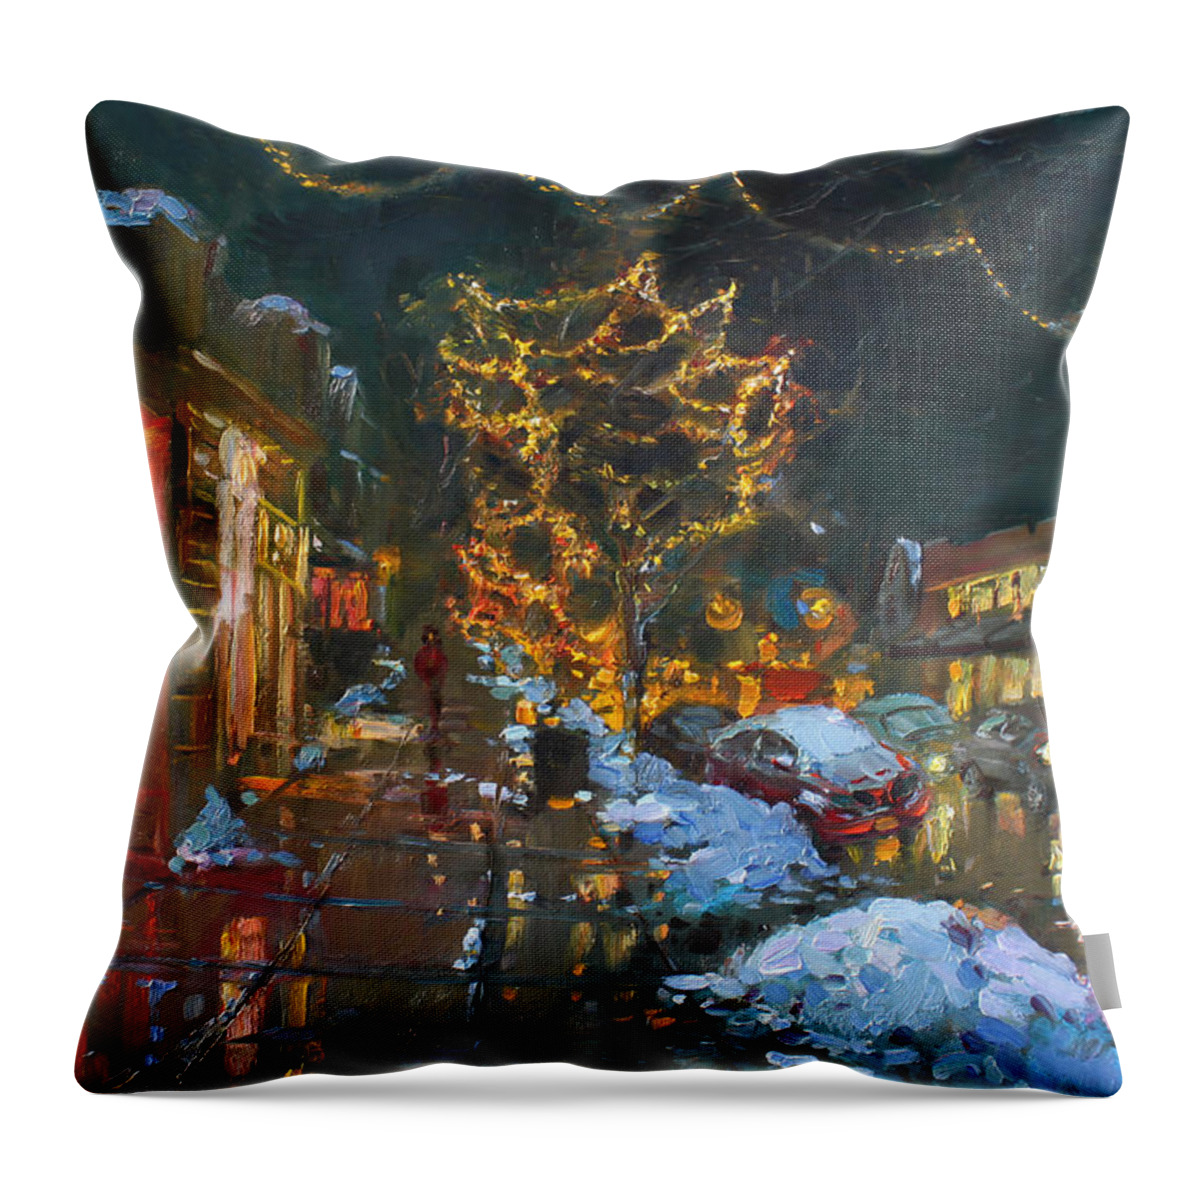 Christmas Lights Throw Pillow featuring the painting Christmas Reflections by Ylli Haruni